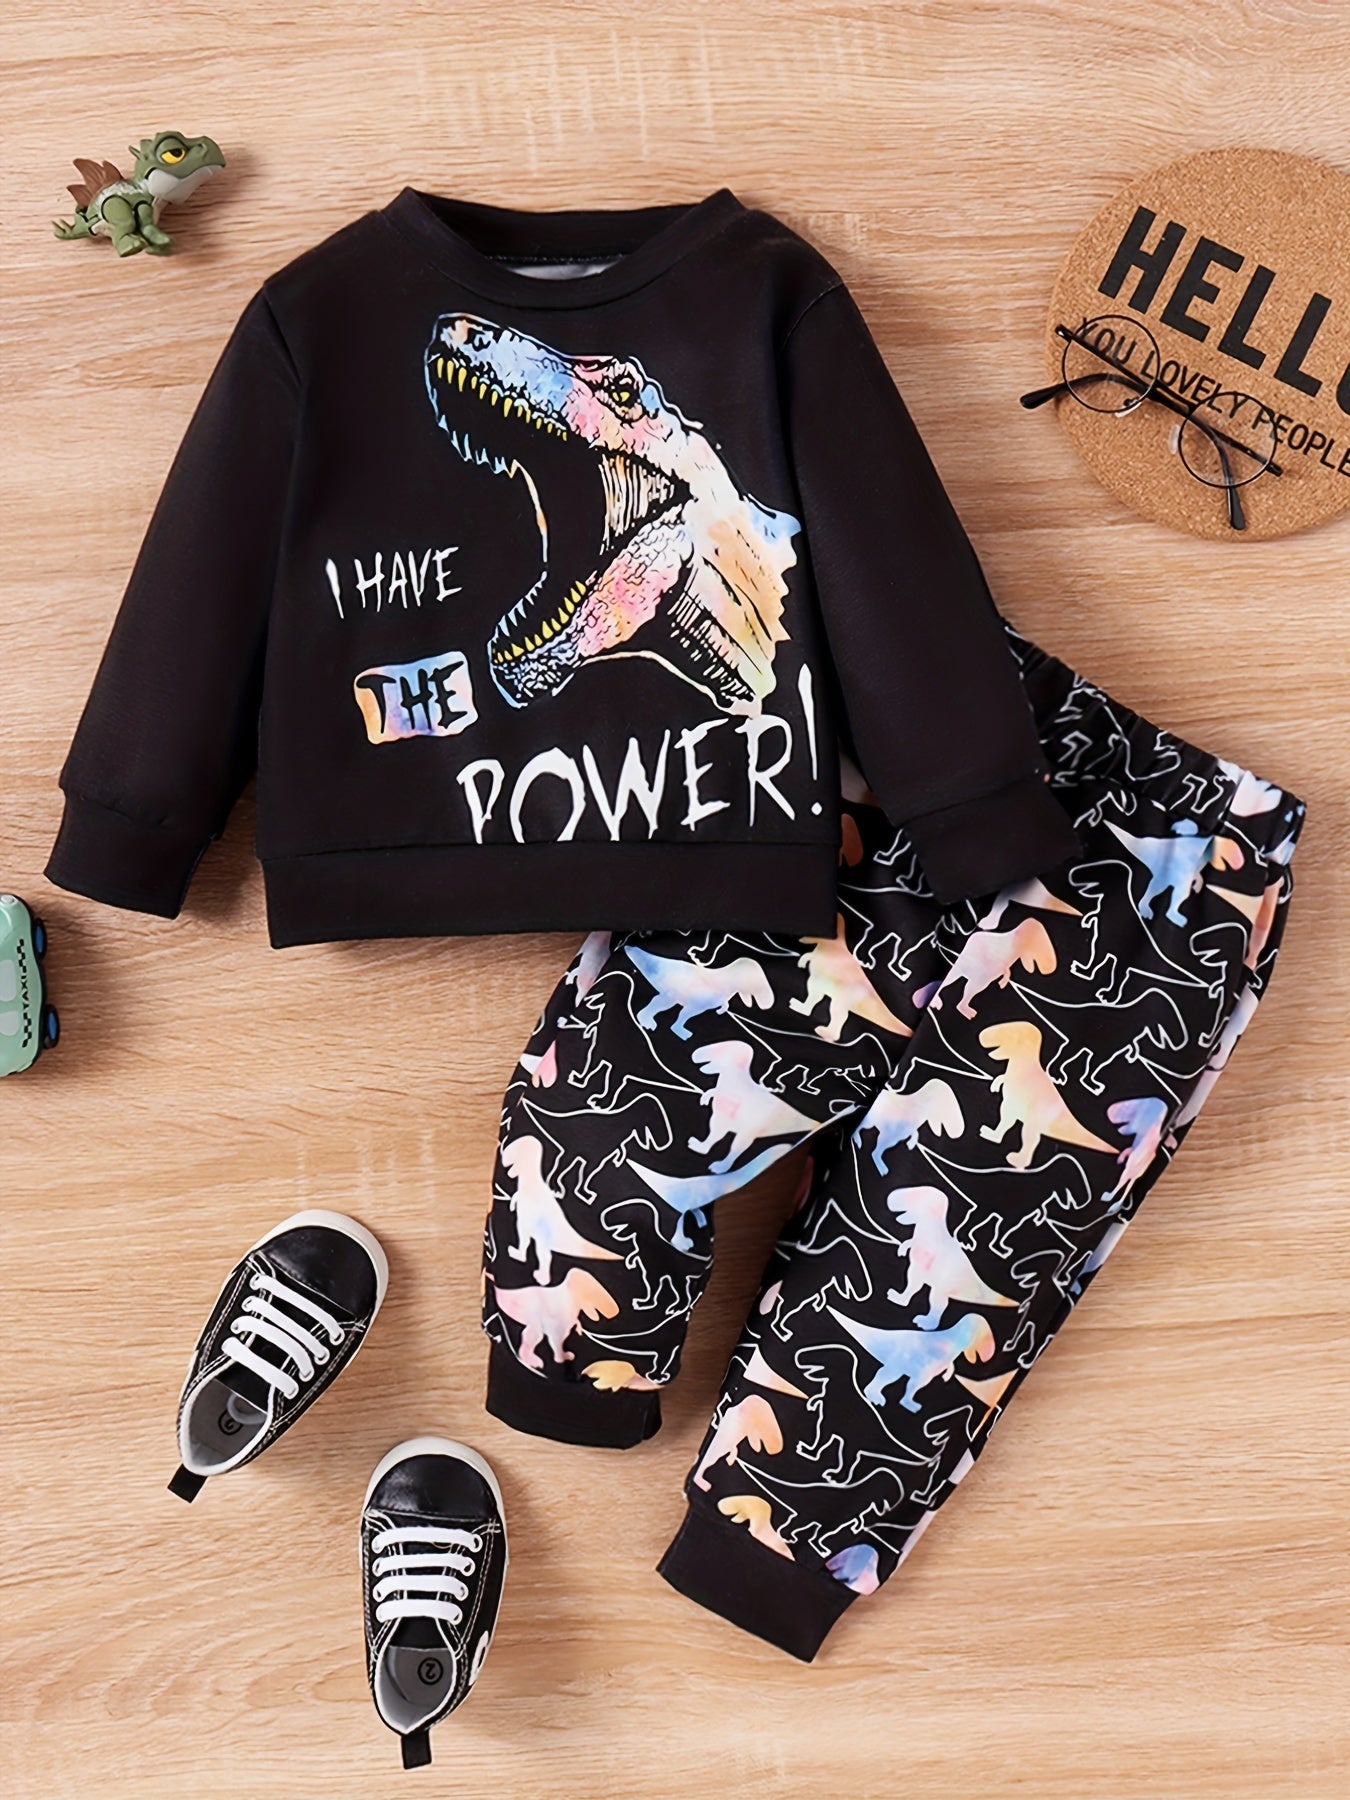 2pcs Boy's Dinosaur Pattern Outfit, Sweatshirt & Sweatpants Set, I HAVE THE POWER Print Casual Long Sleeve Top, Toddler Kid's Clothes For Spring Fall Winter